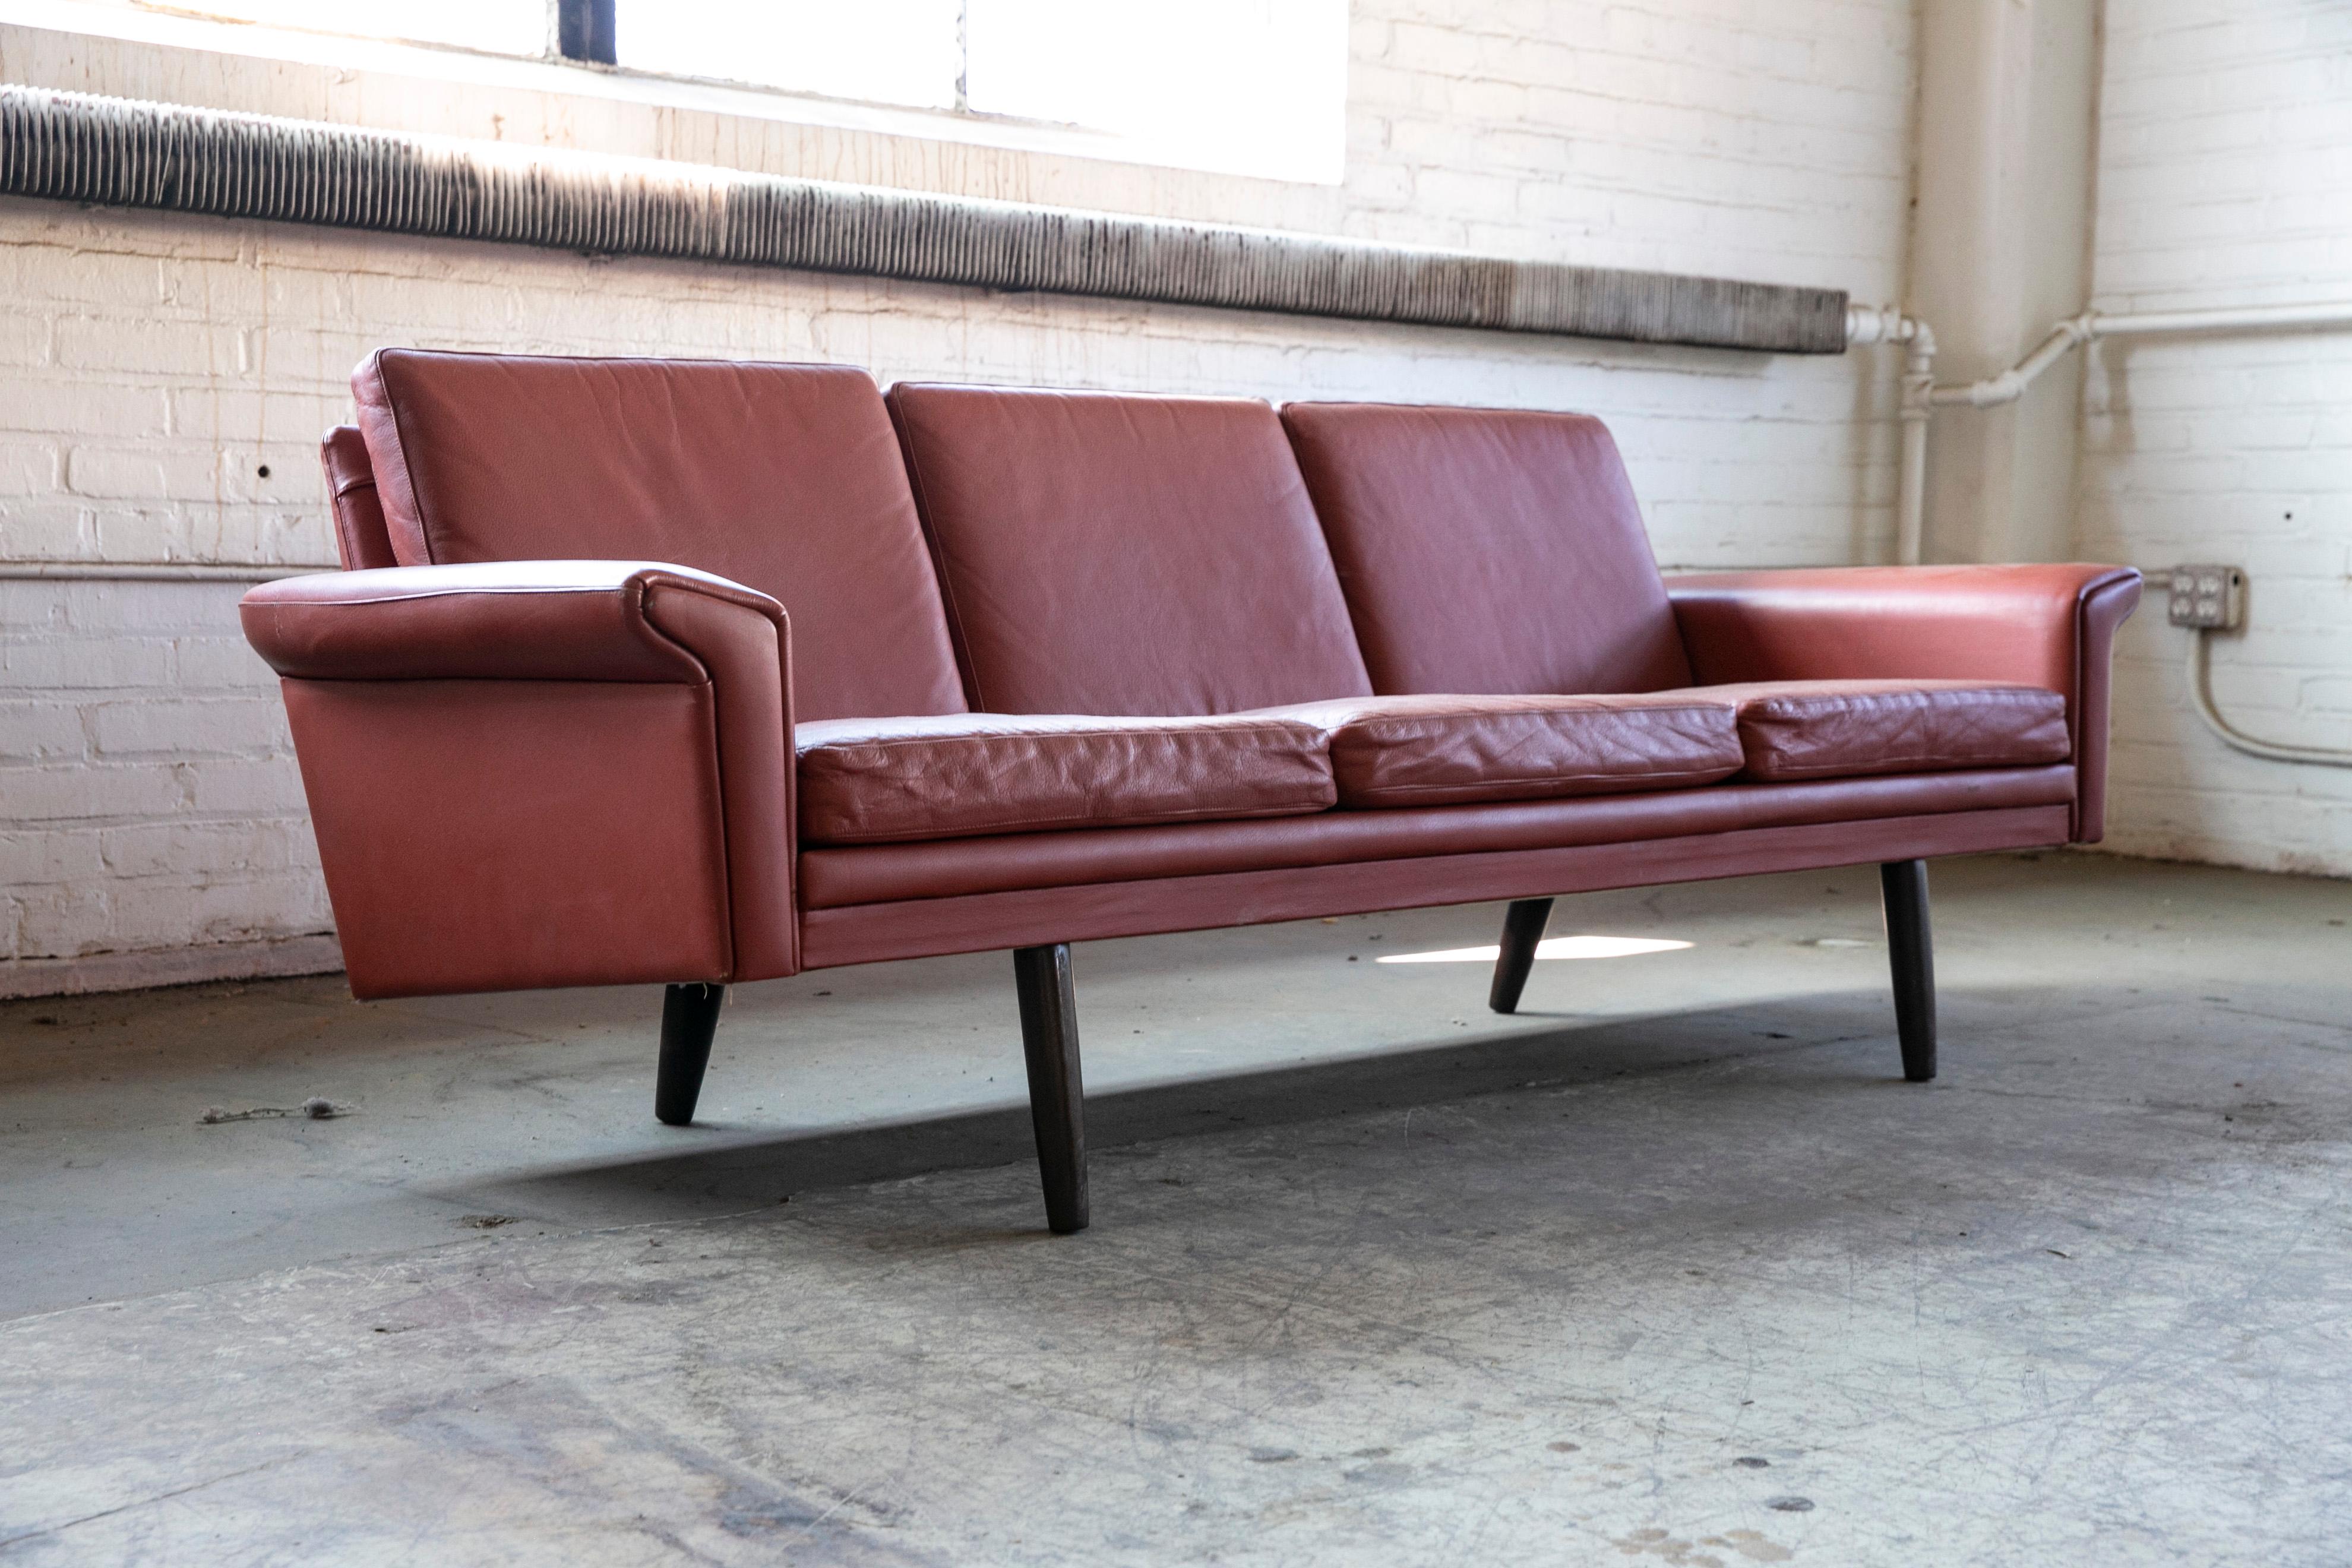 Mid-Century Modern Classic Danish Mid-Century Sofa in Rust Red Colored Leather by Georg Thams